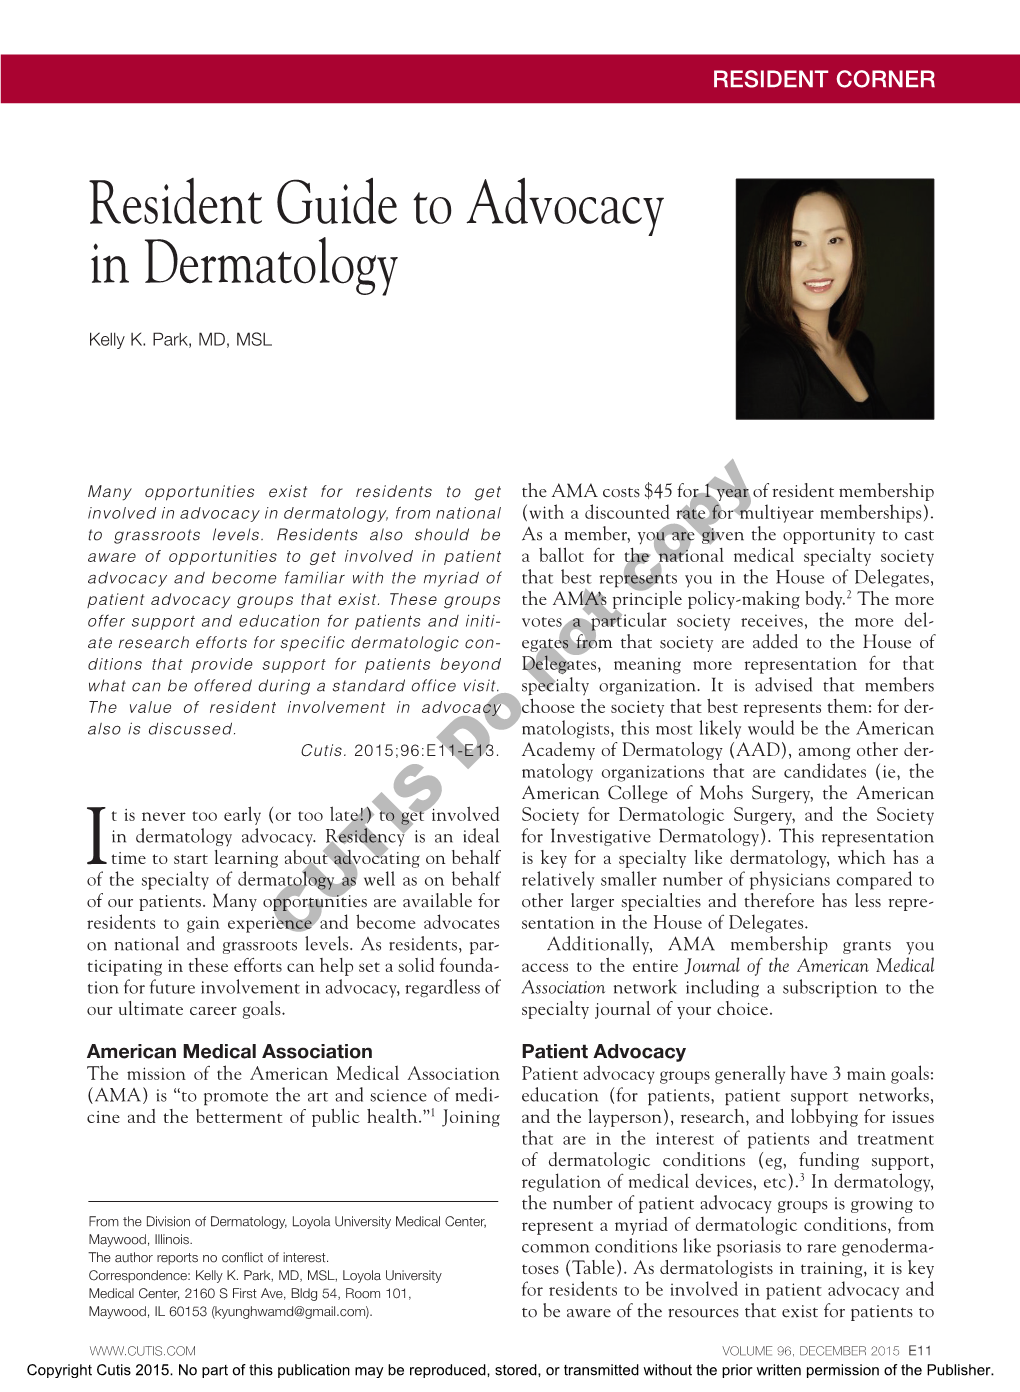 Resident Guide to Advocacy in Dermatology